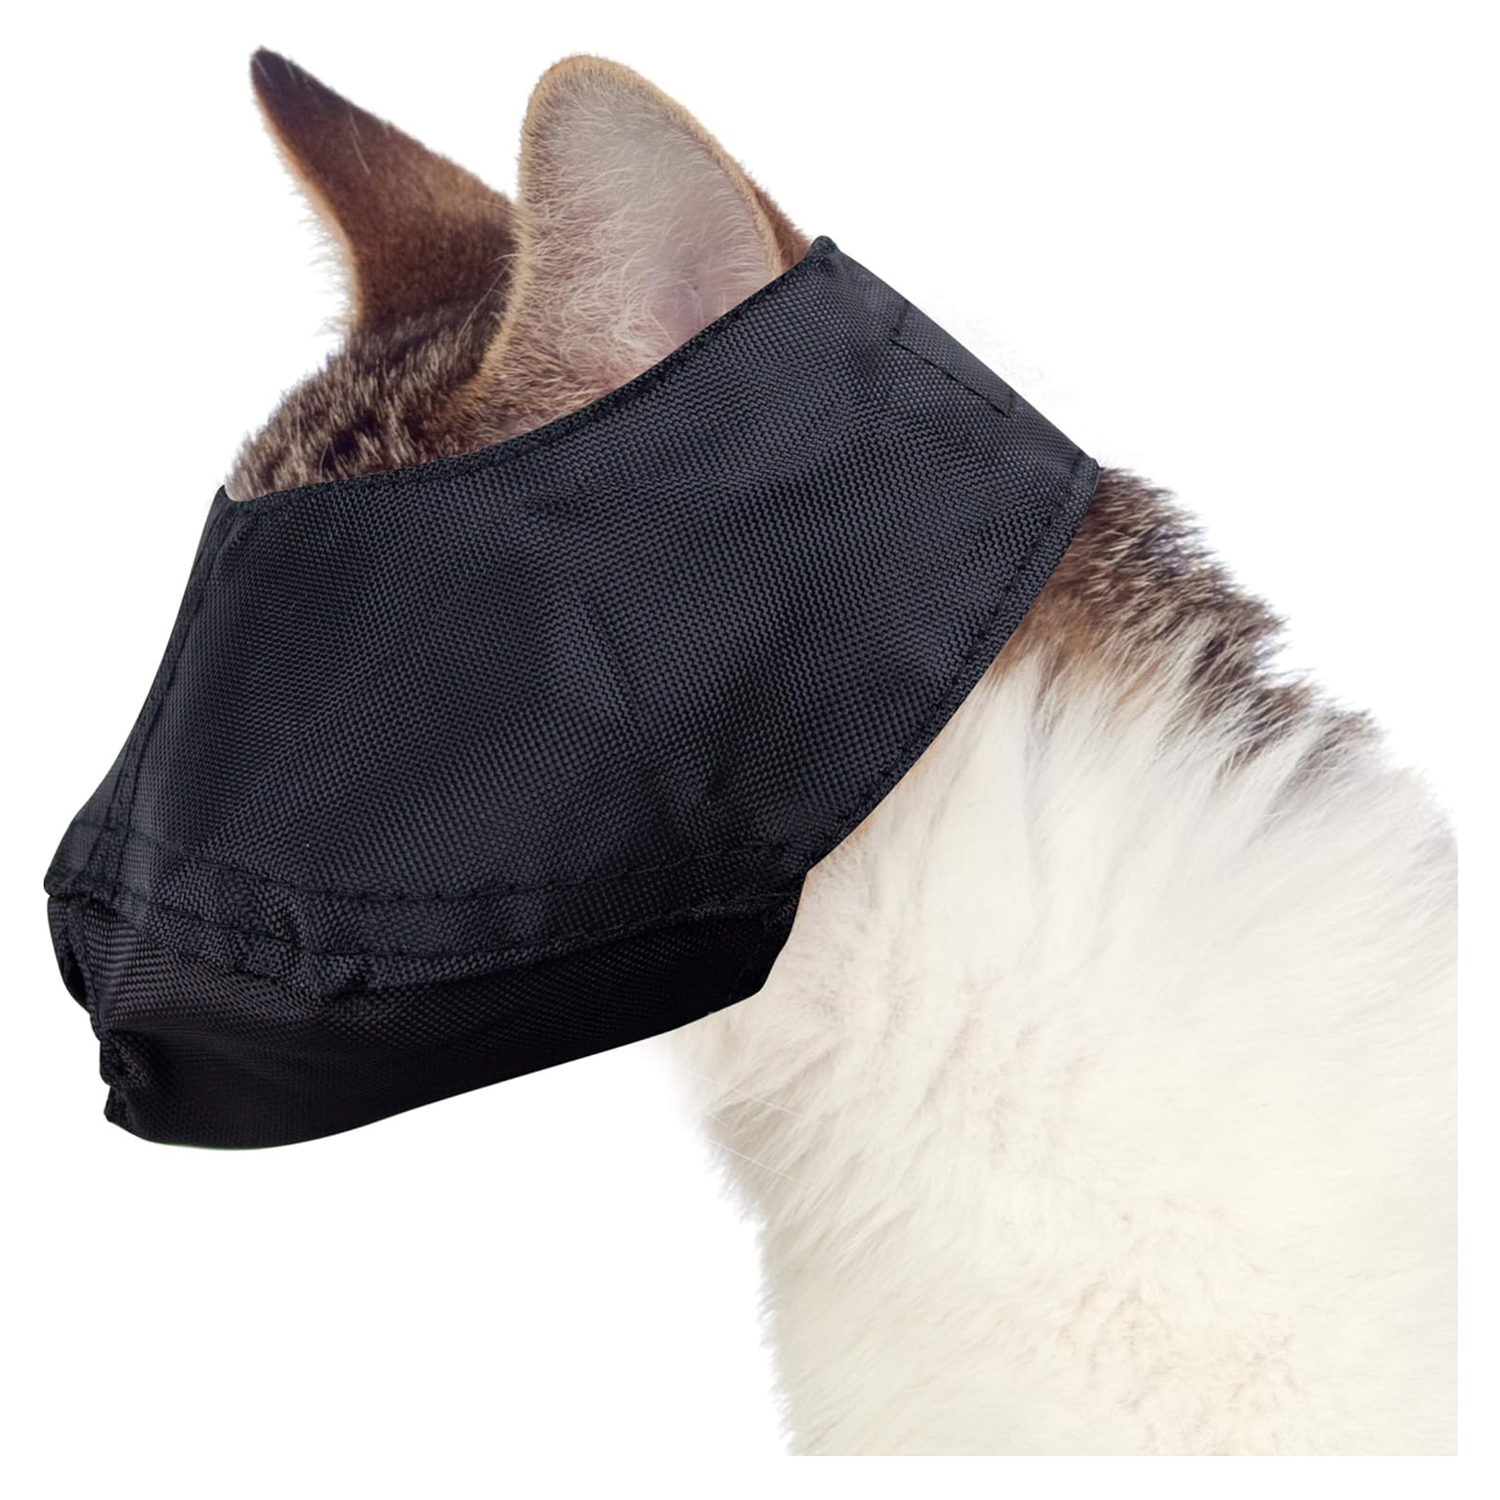 Downtown Pet Supply - Cat Muzzle for Grooming